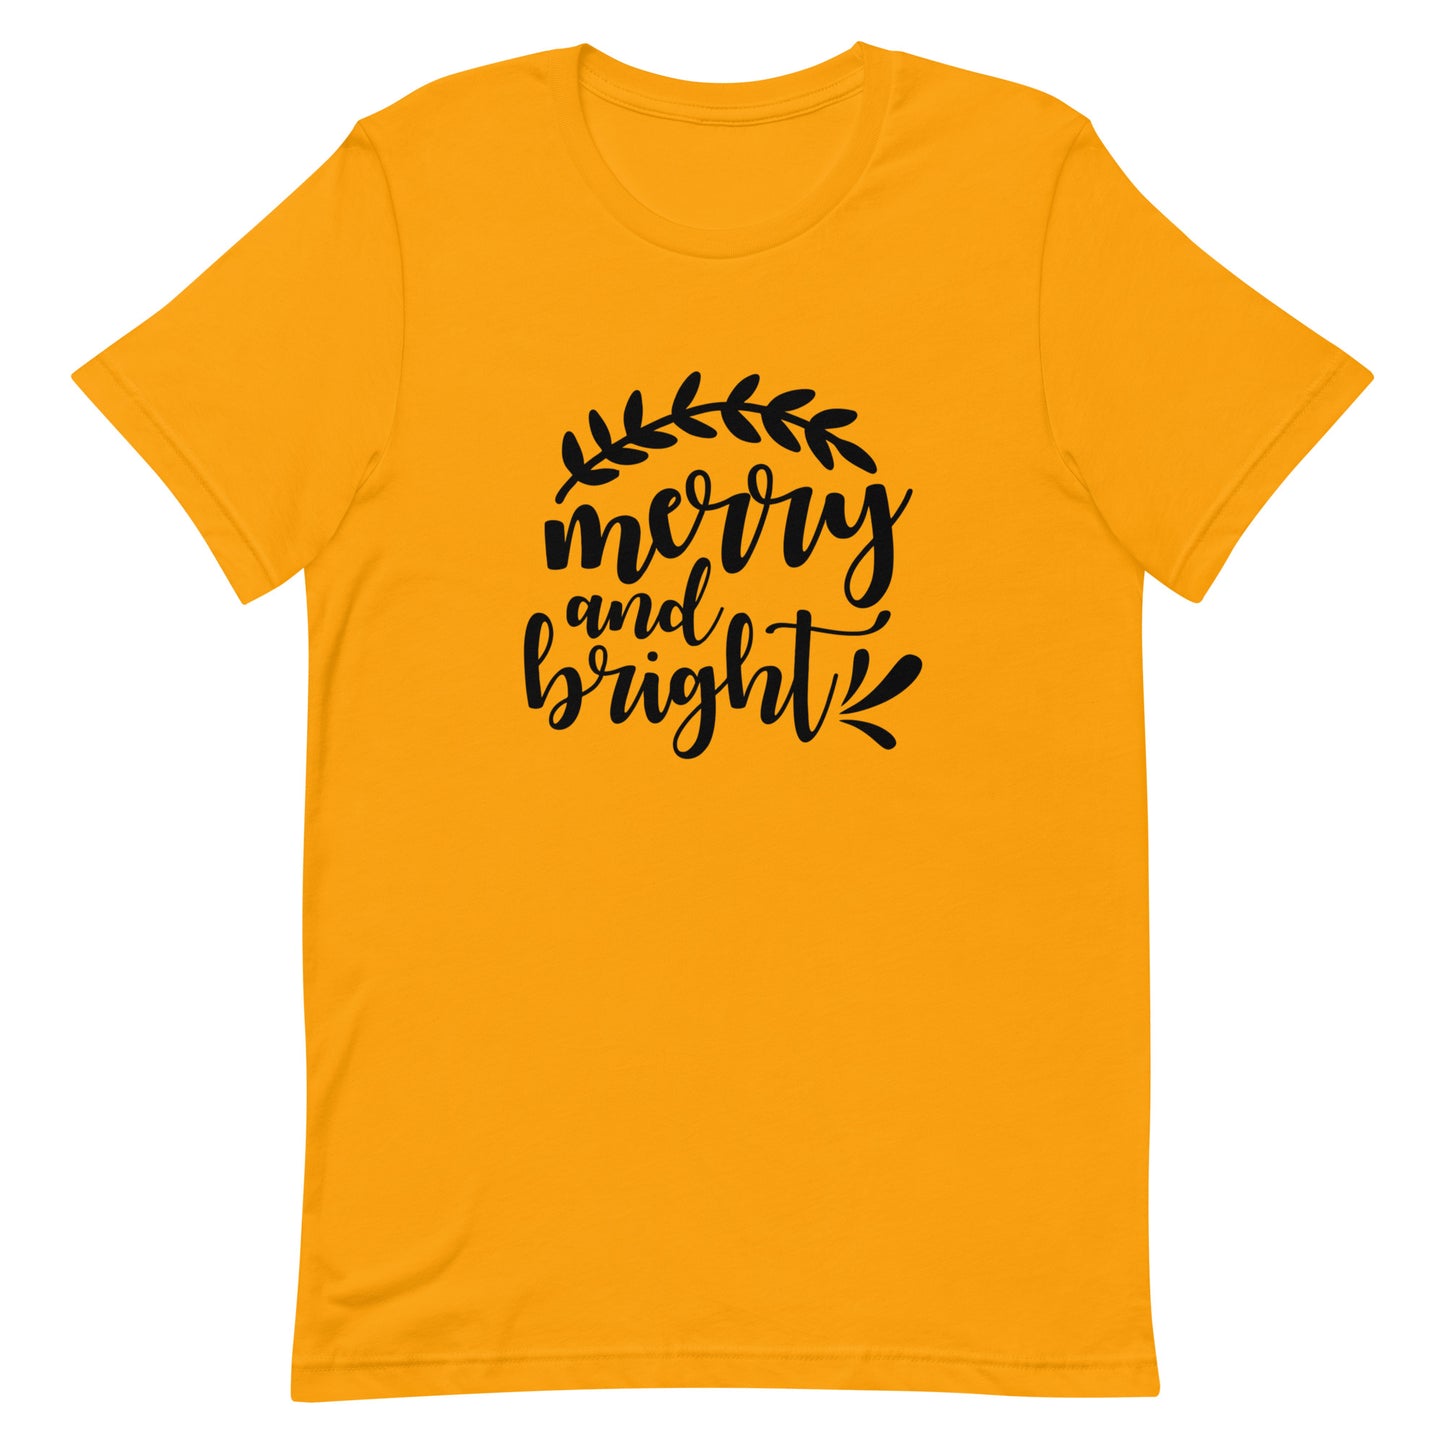 Merry and Bright Unisex t-shirt